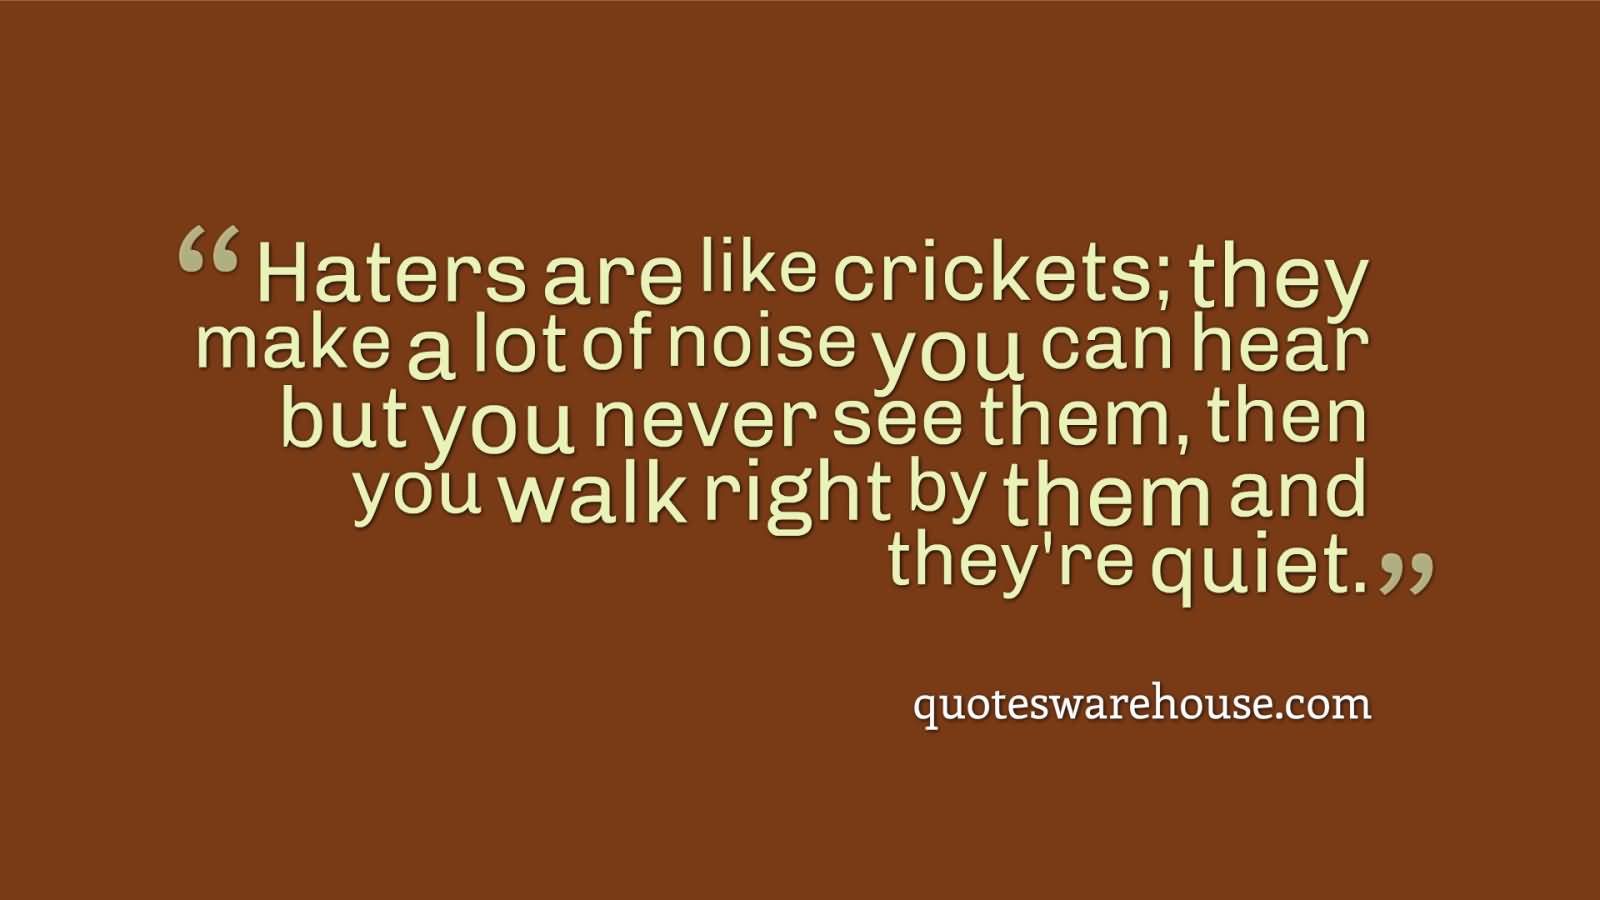 Haters are like crickets. Crickets make a lot of noise, you hear it but you can't see them. Then right when you walk by them, they're quiet.